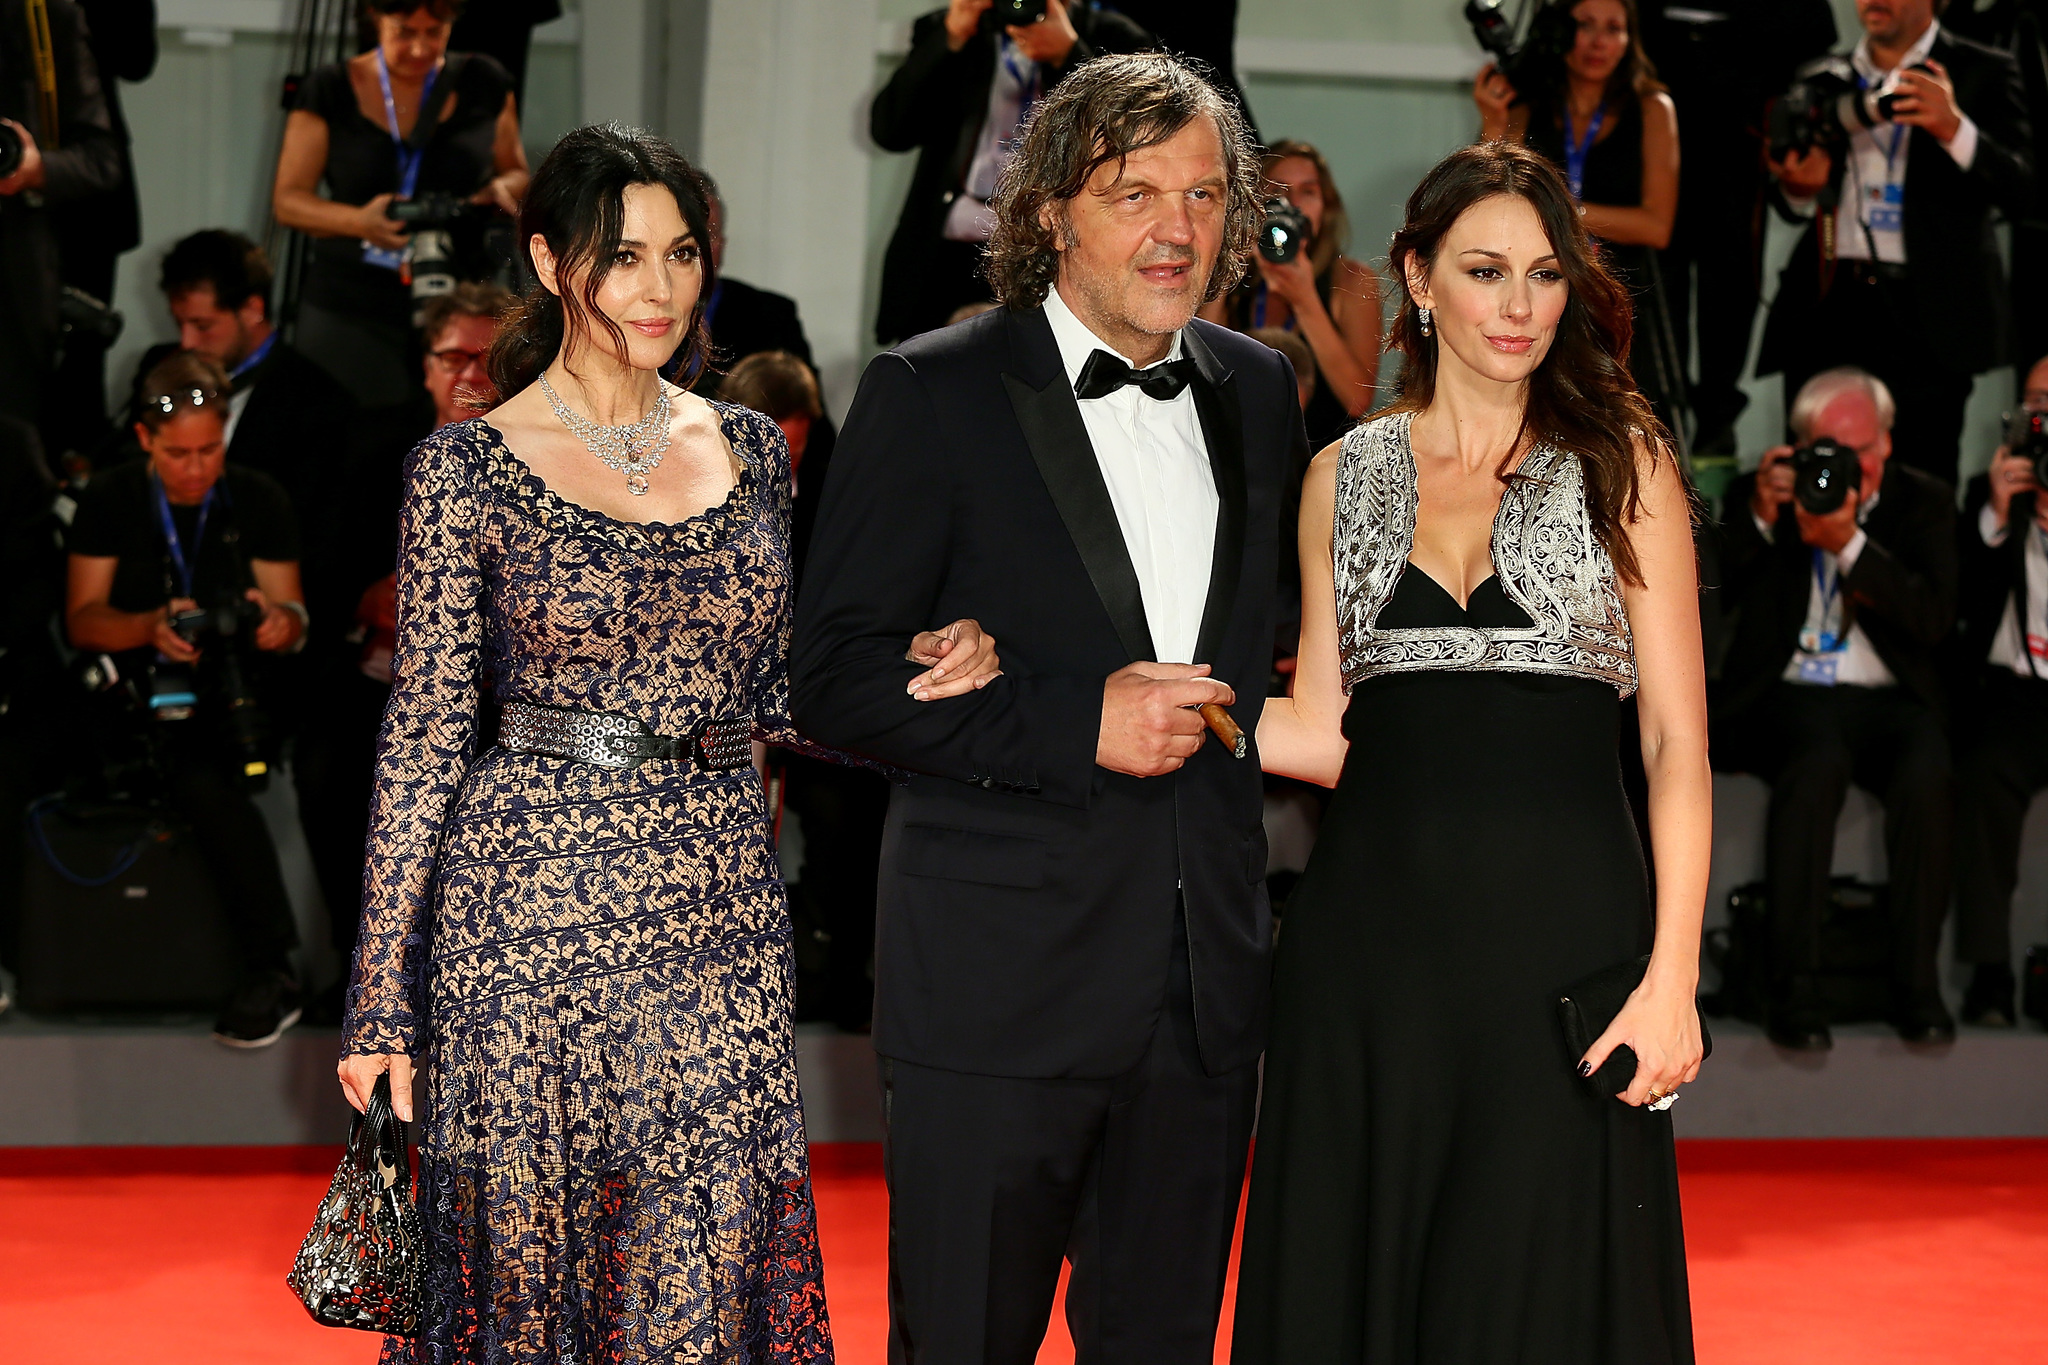 Monica Bellucci, Emir Kusturica, and Sloboda Micalovic at an event for On the Milky Road (2016)